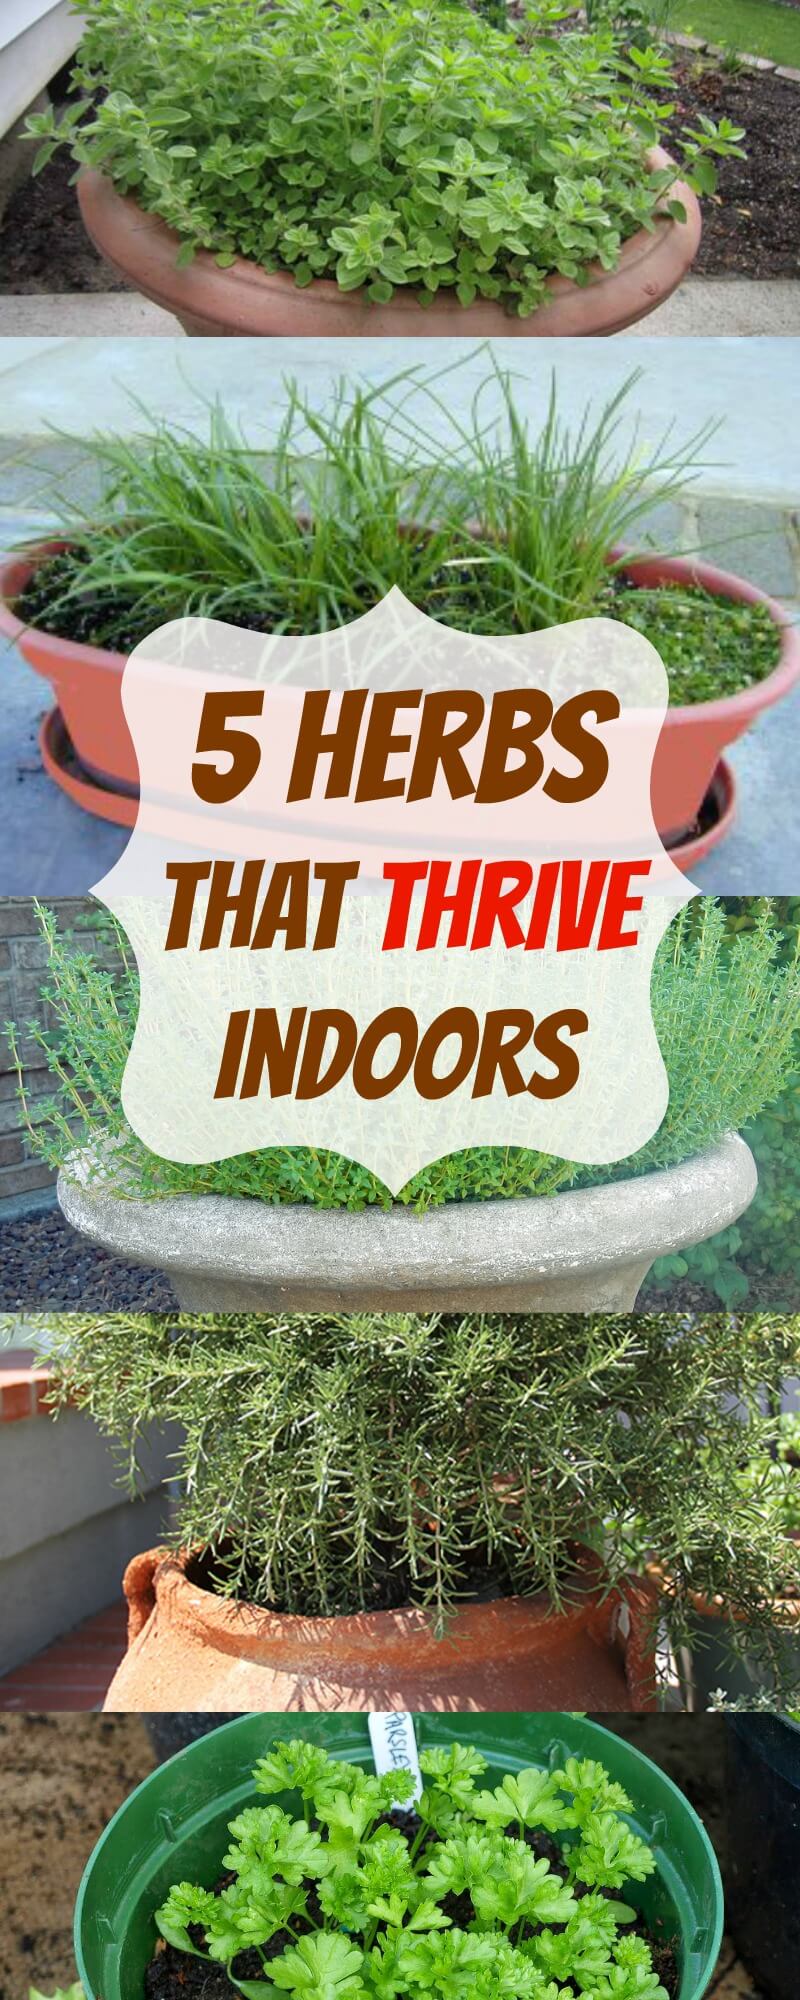 herbs that thrive indoors